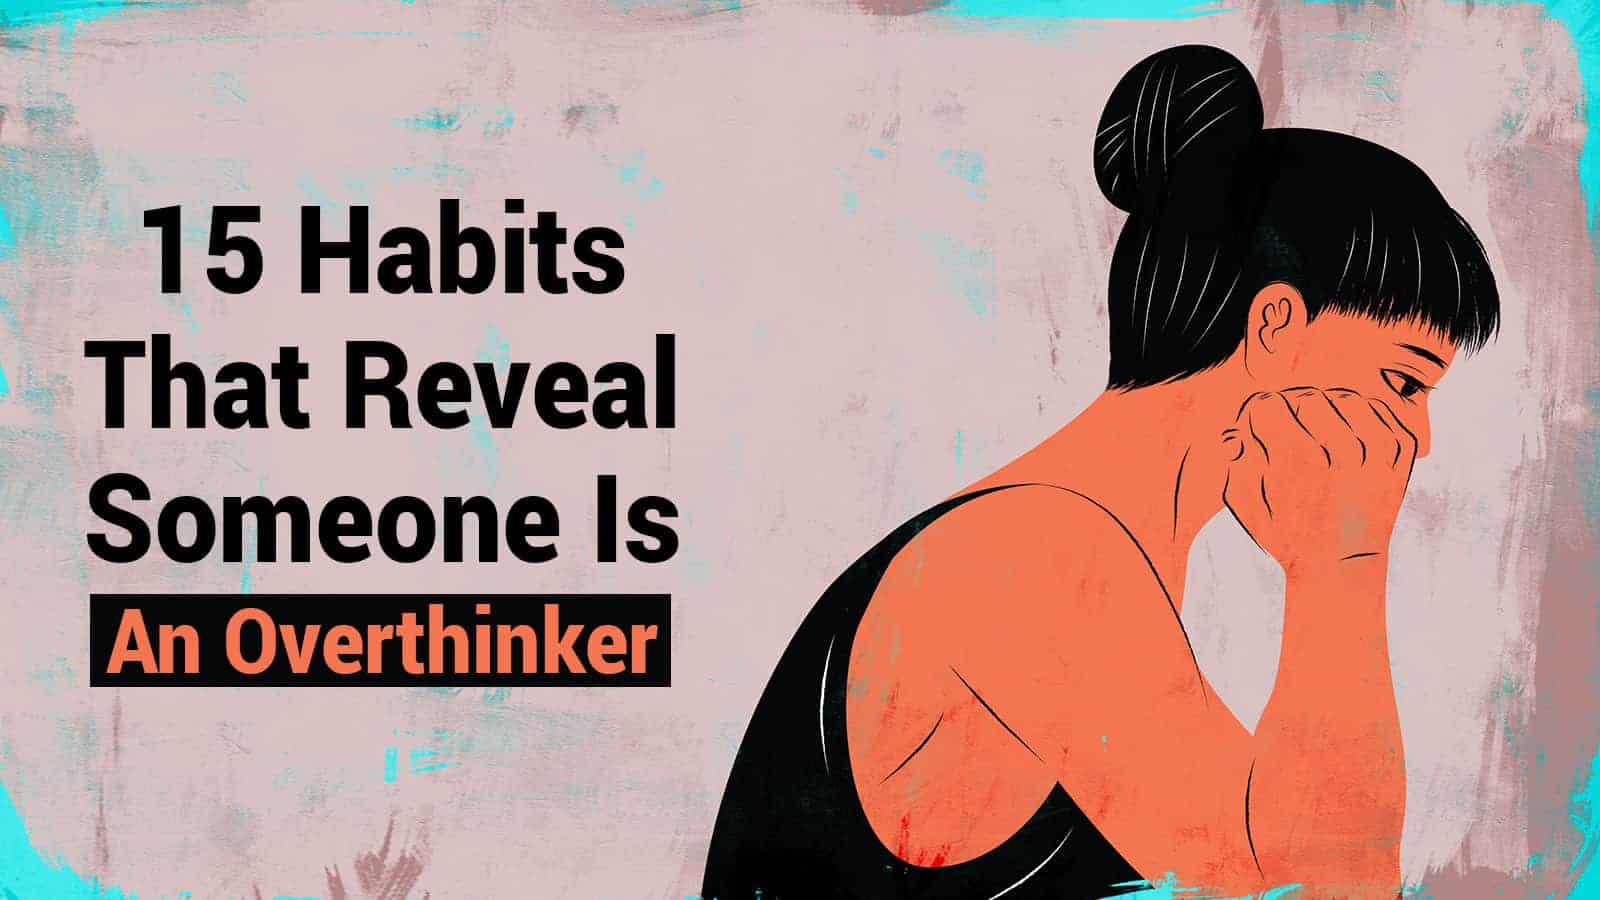 15 Habits That Reveal Someone Is An Overthinker